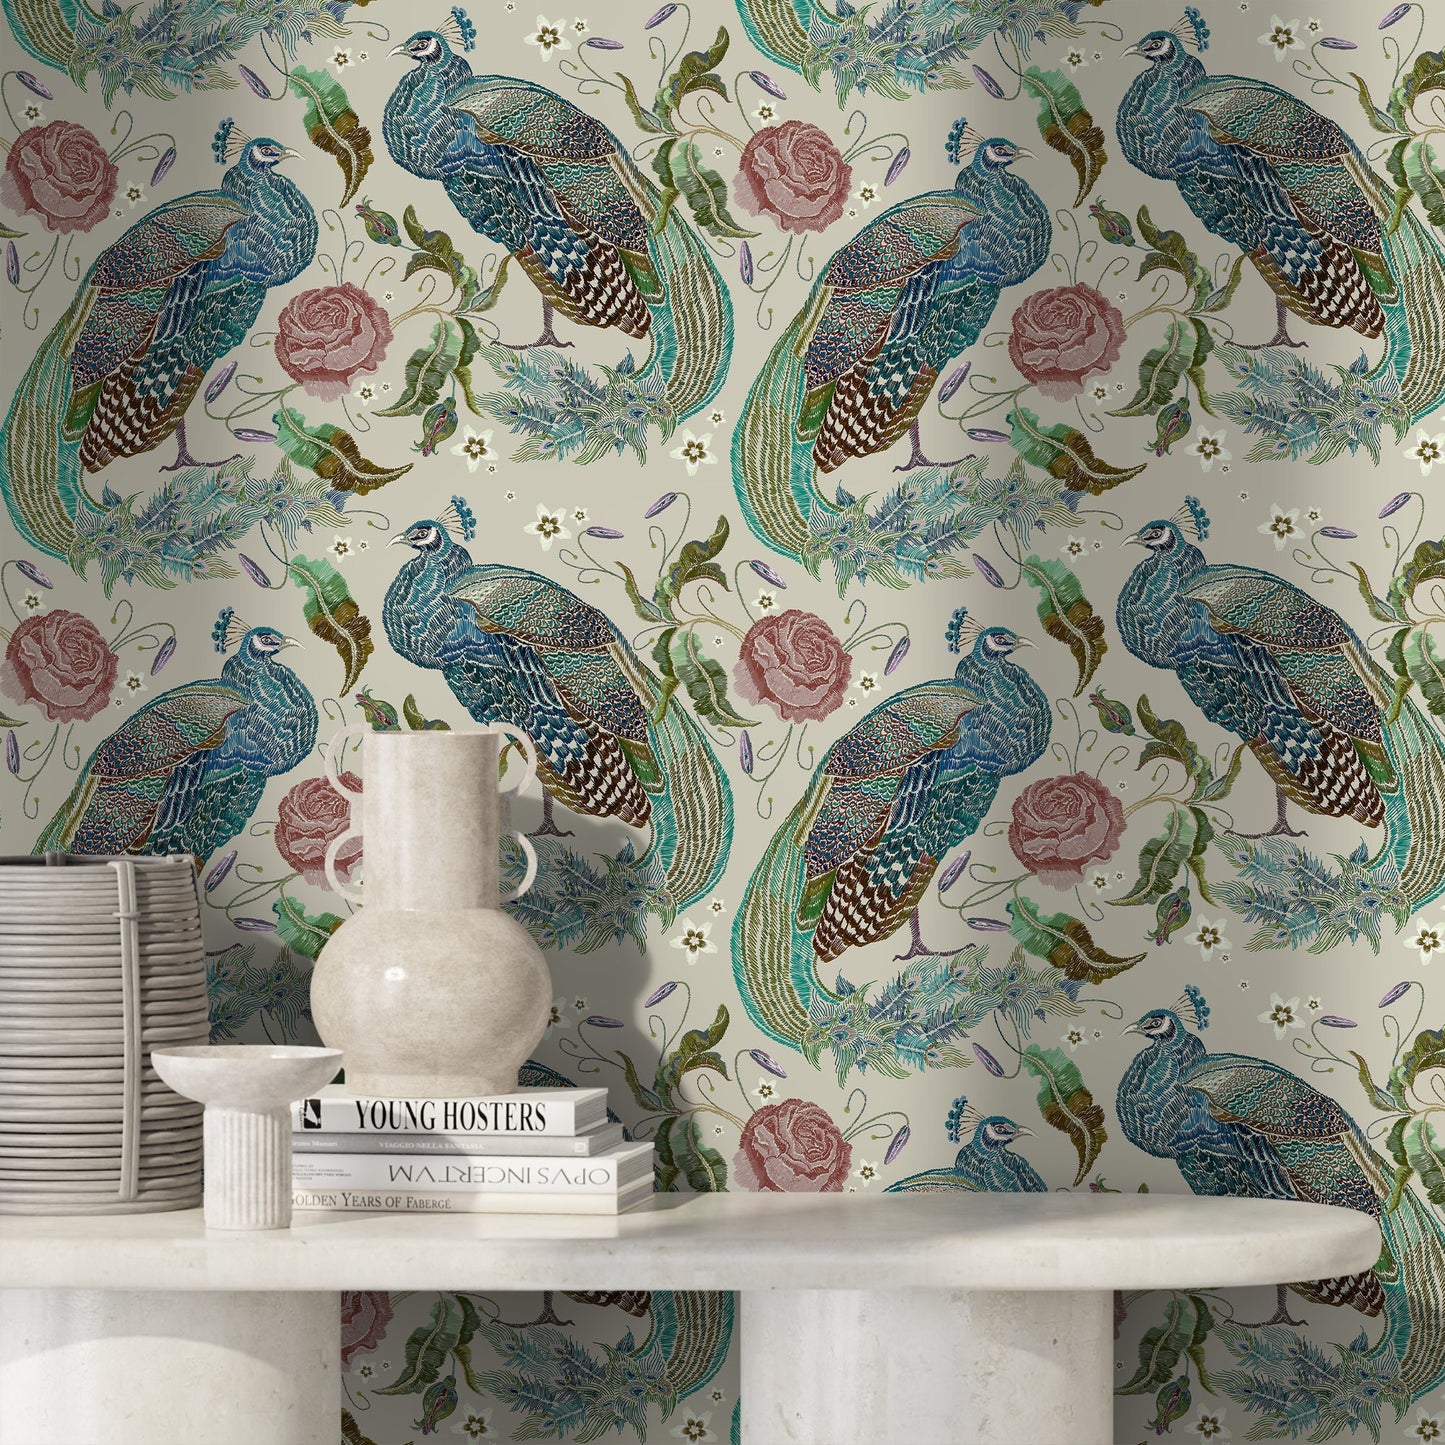 Peacock Wallpaper Vintage Floral Wallpaper Peel and Stick and Traditional Wallpaper - D883